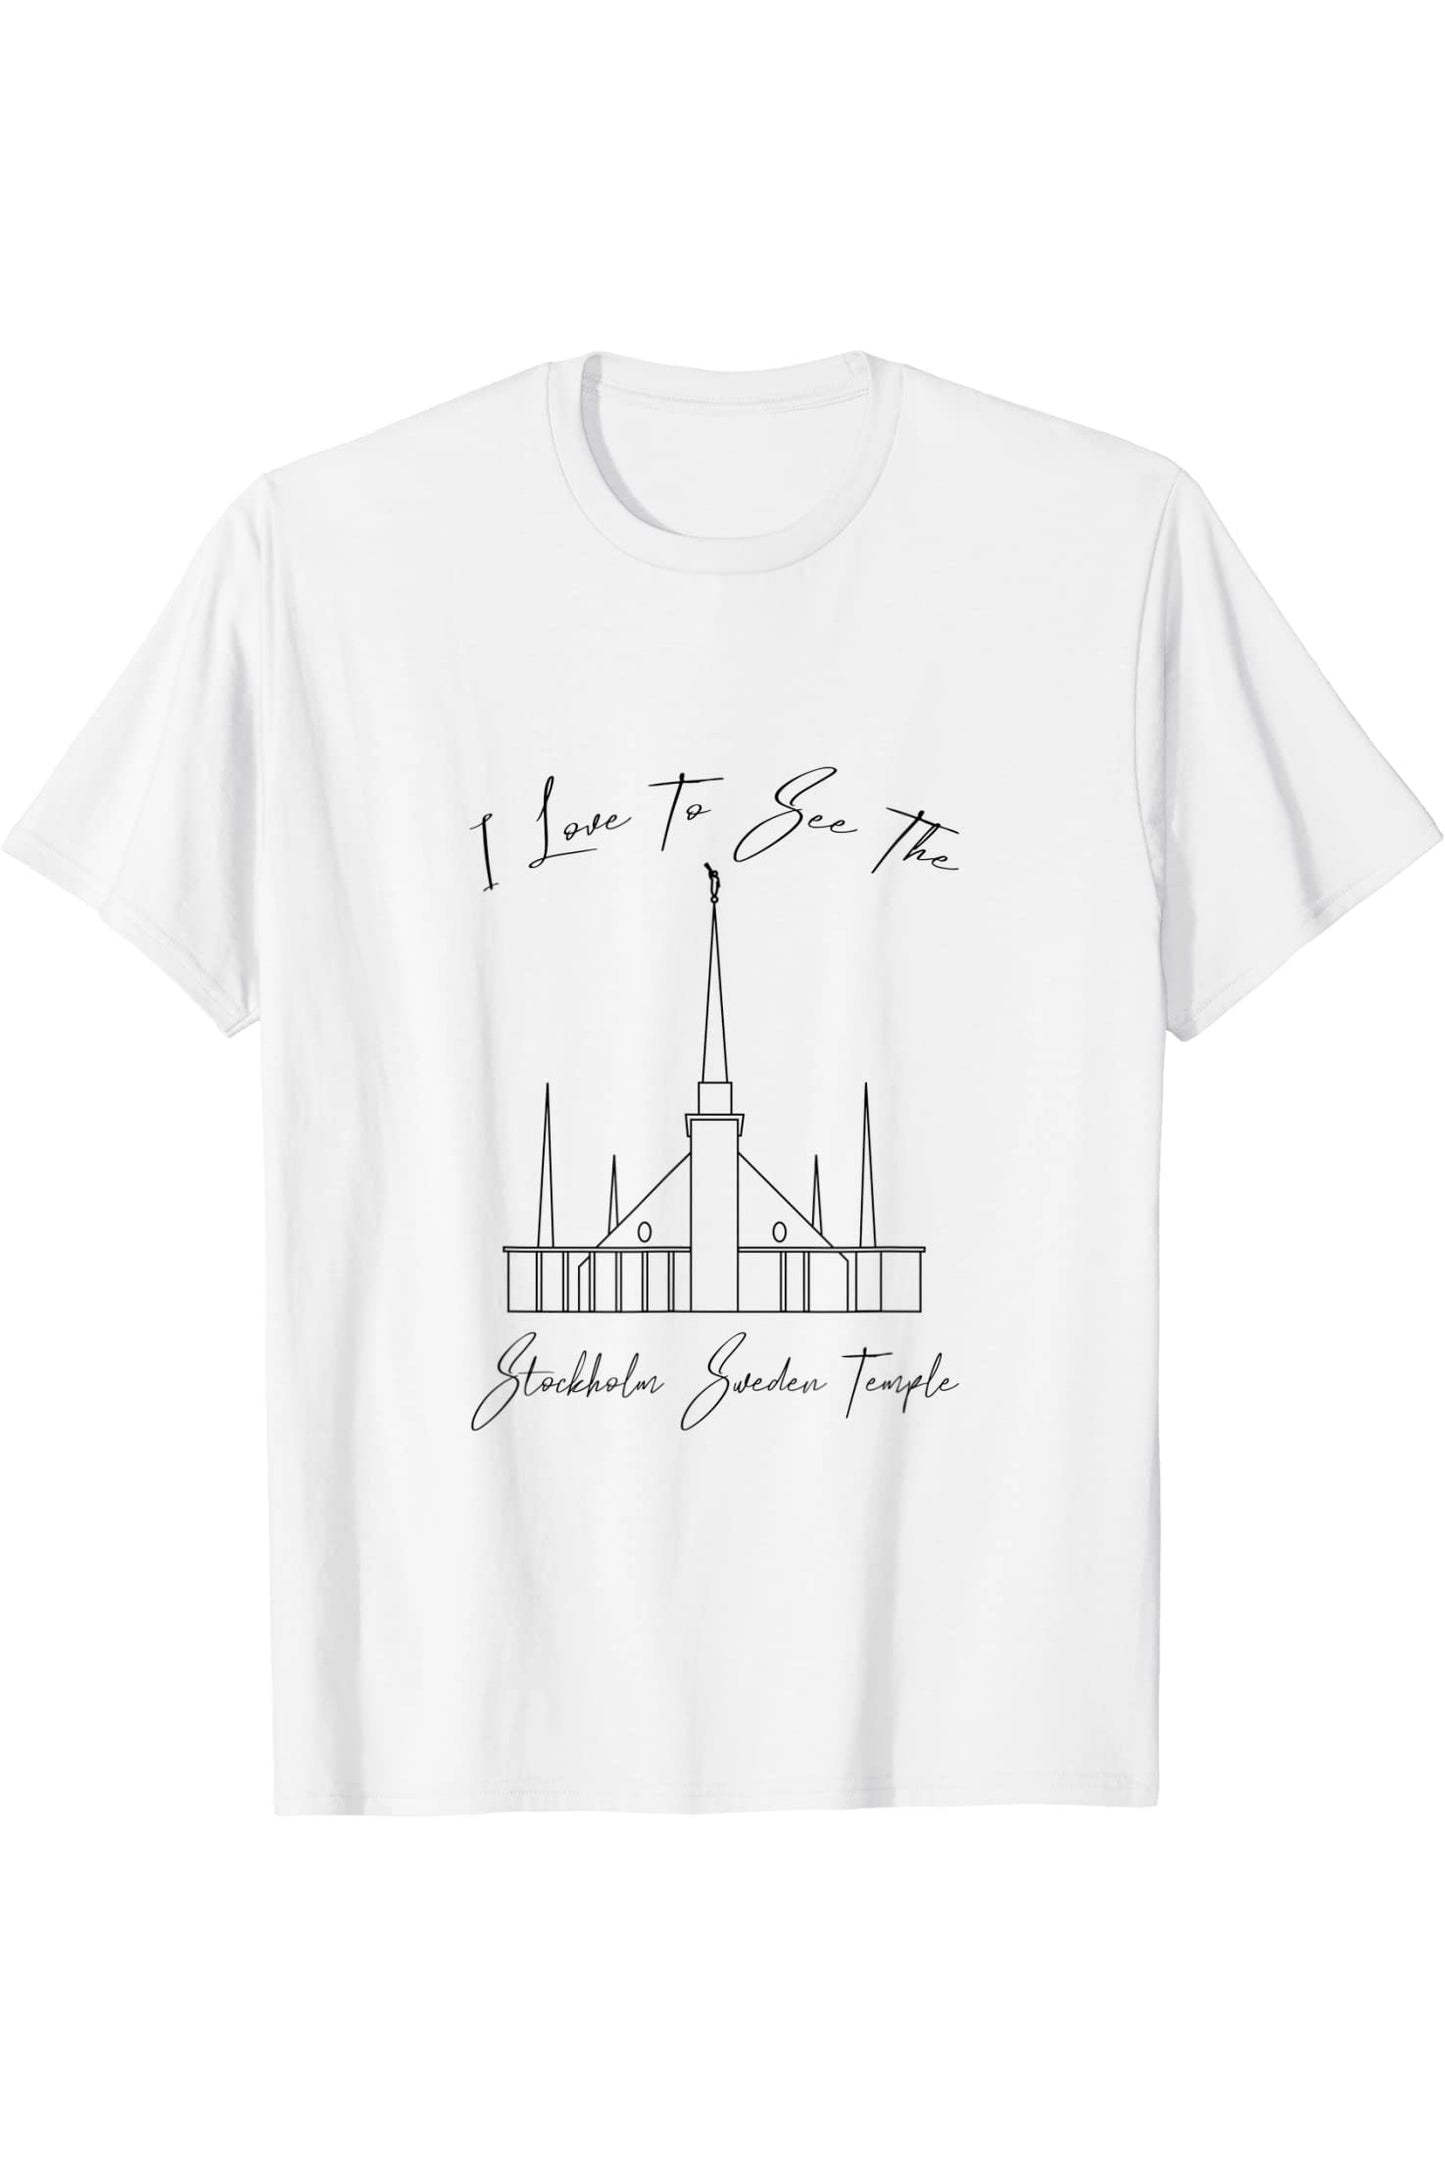 Stockholm Schweden Tempel, I love to see my temple, calligraph T-Shirt